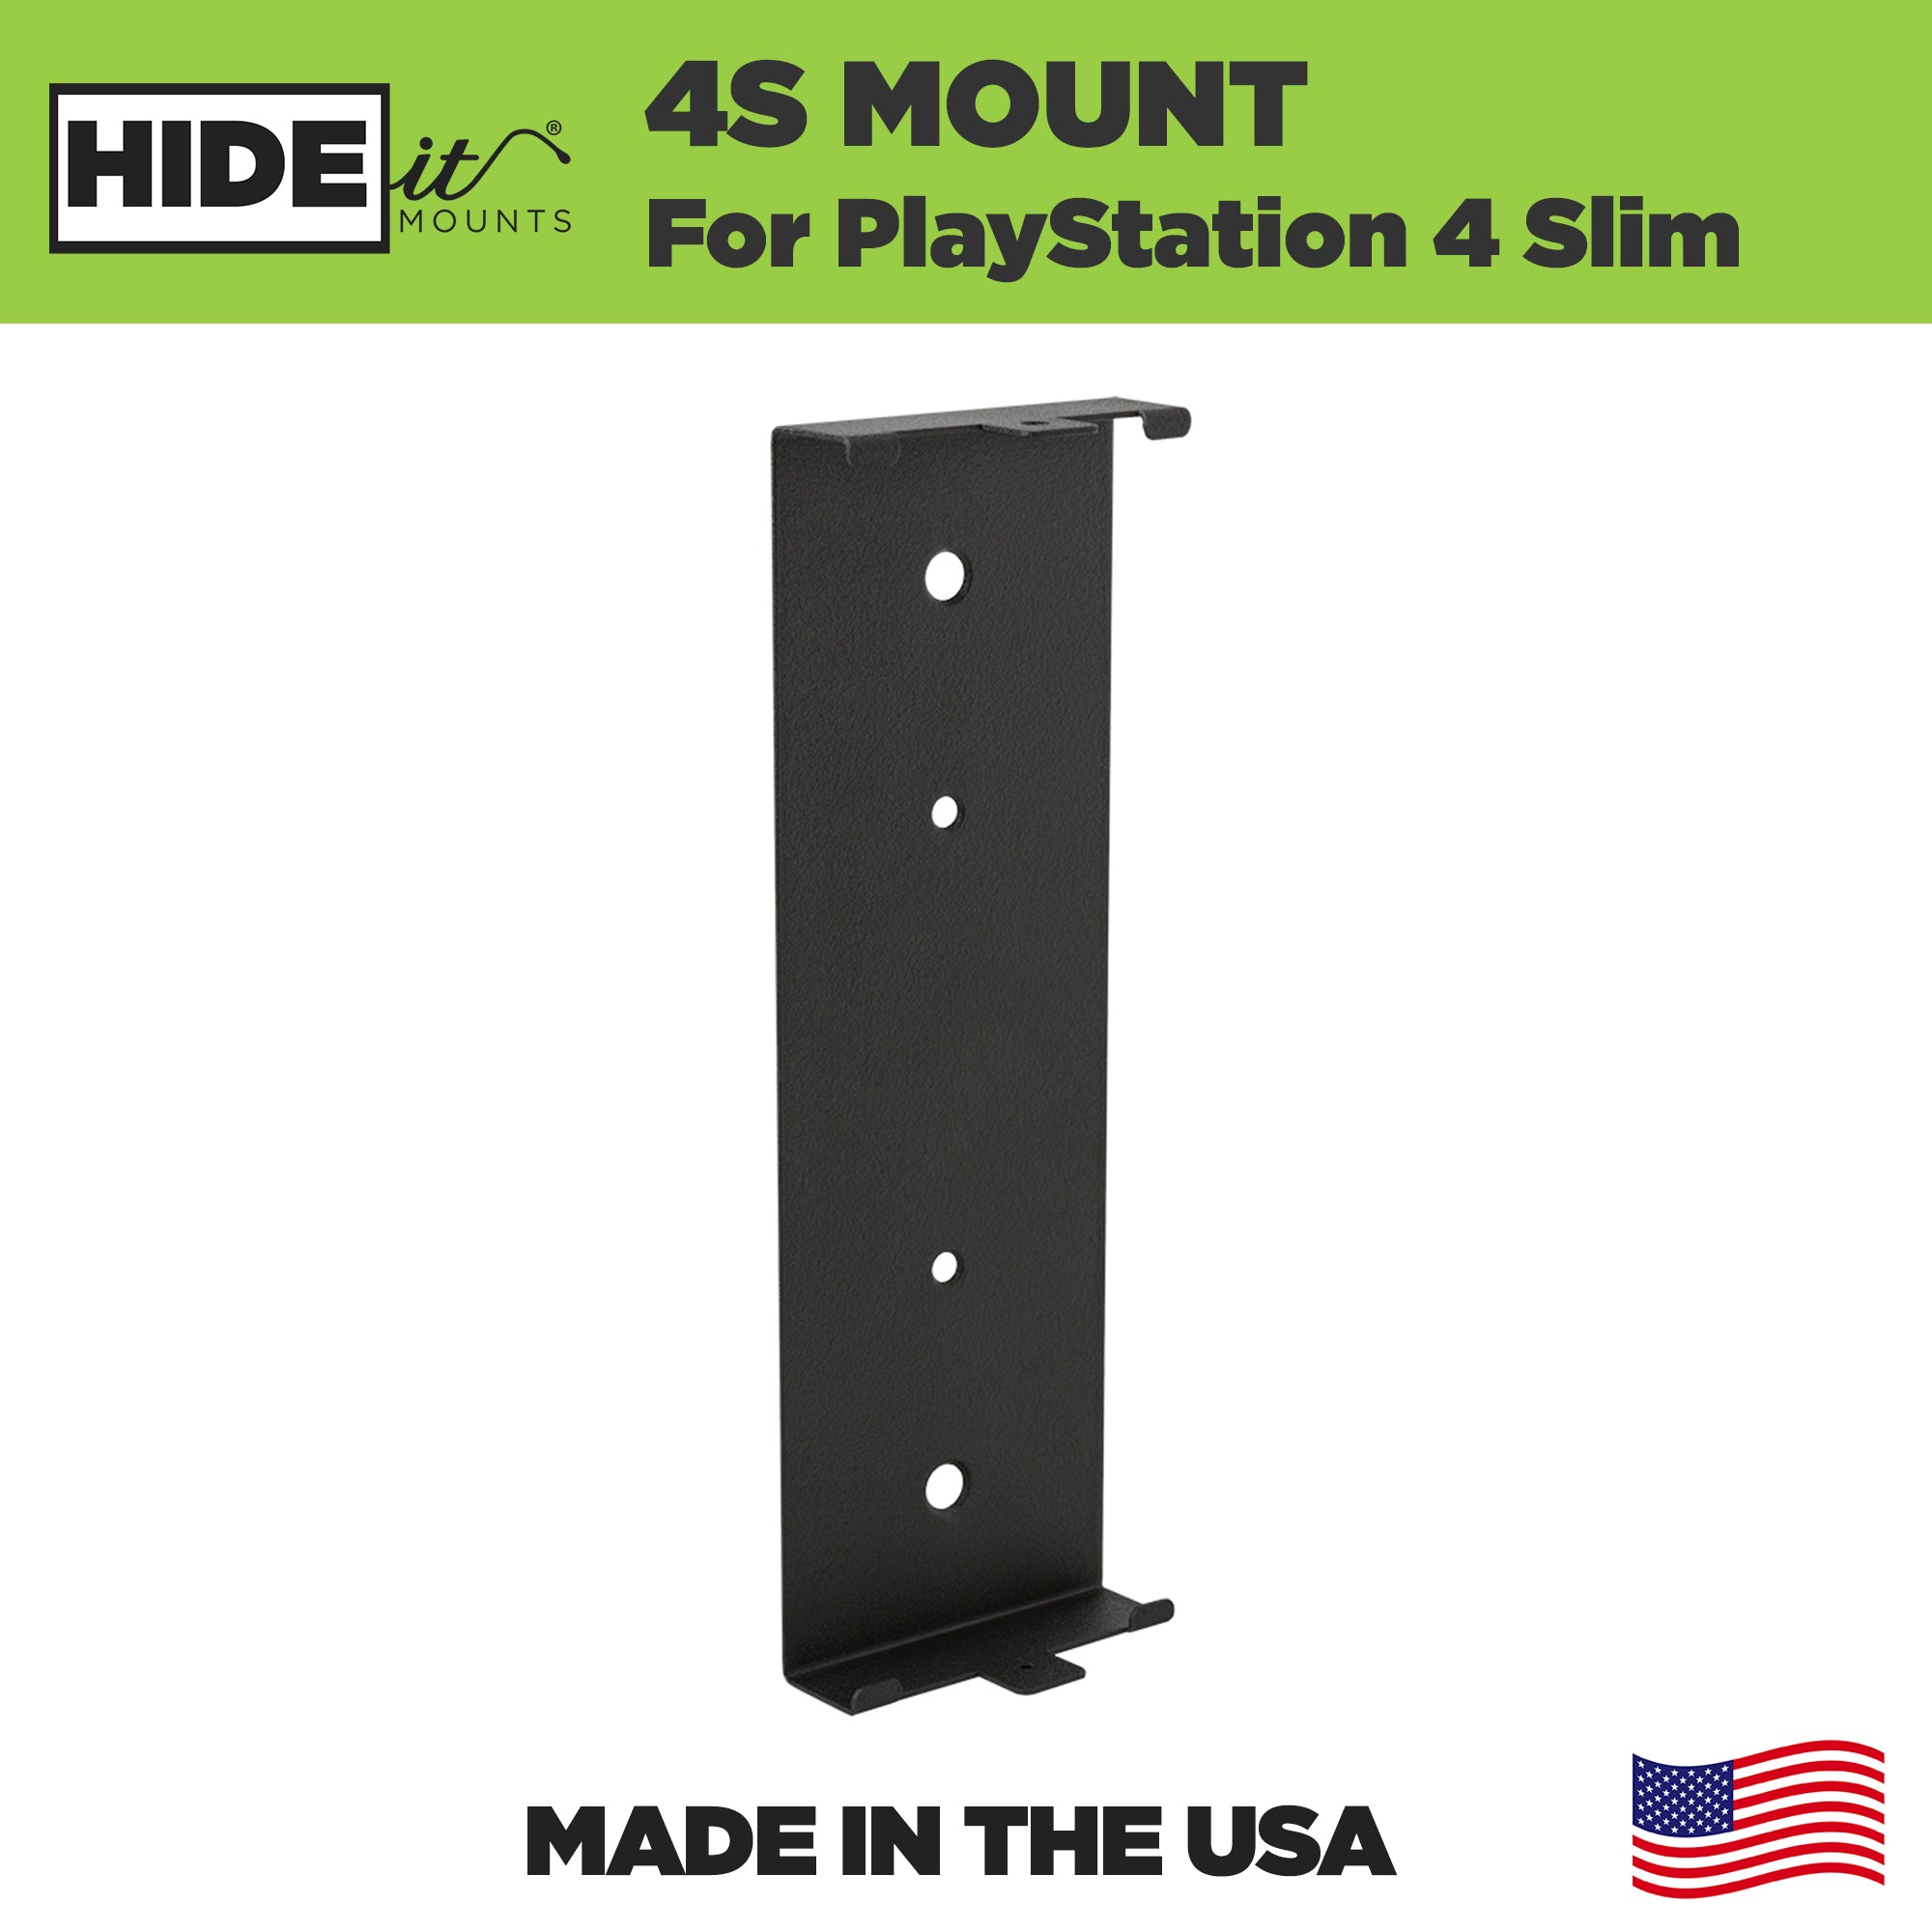 PS4 Slim Wall Mount | HIDEit Mount for PlayStation Slim Game Console – Mounts